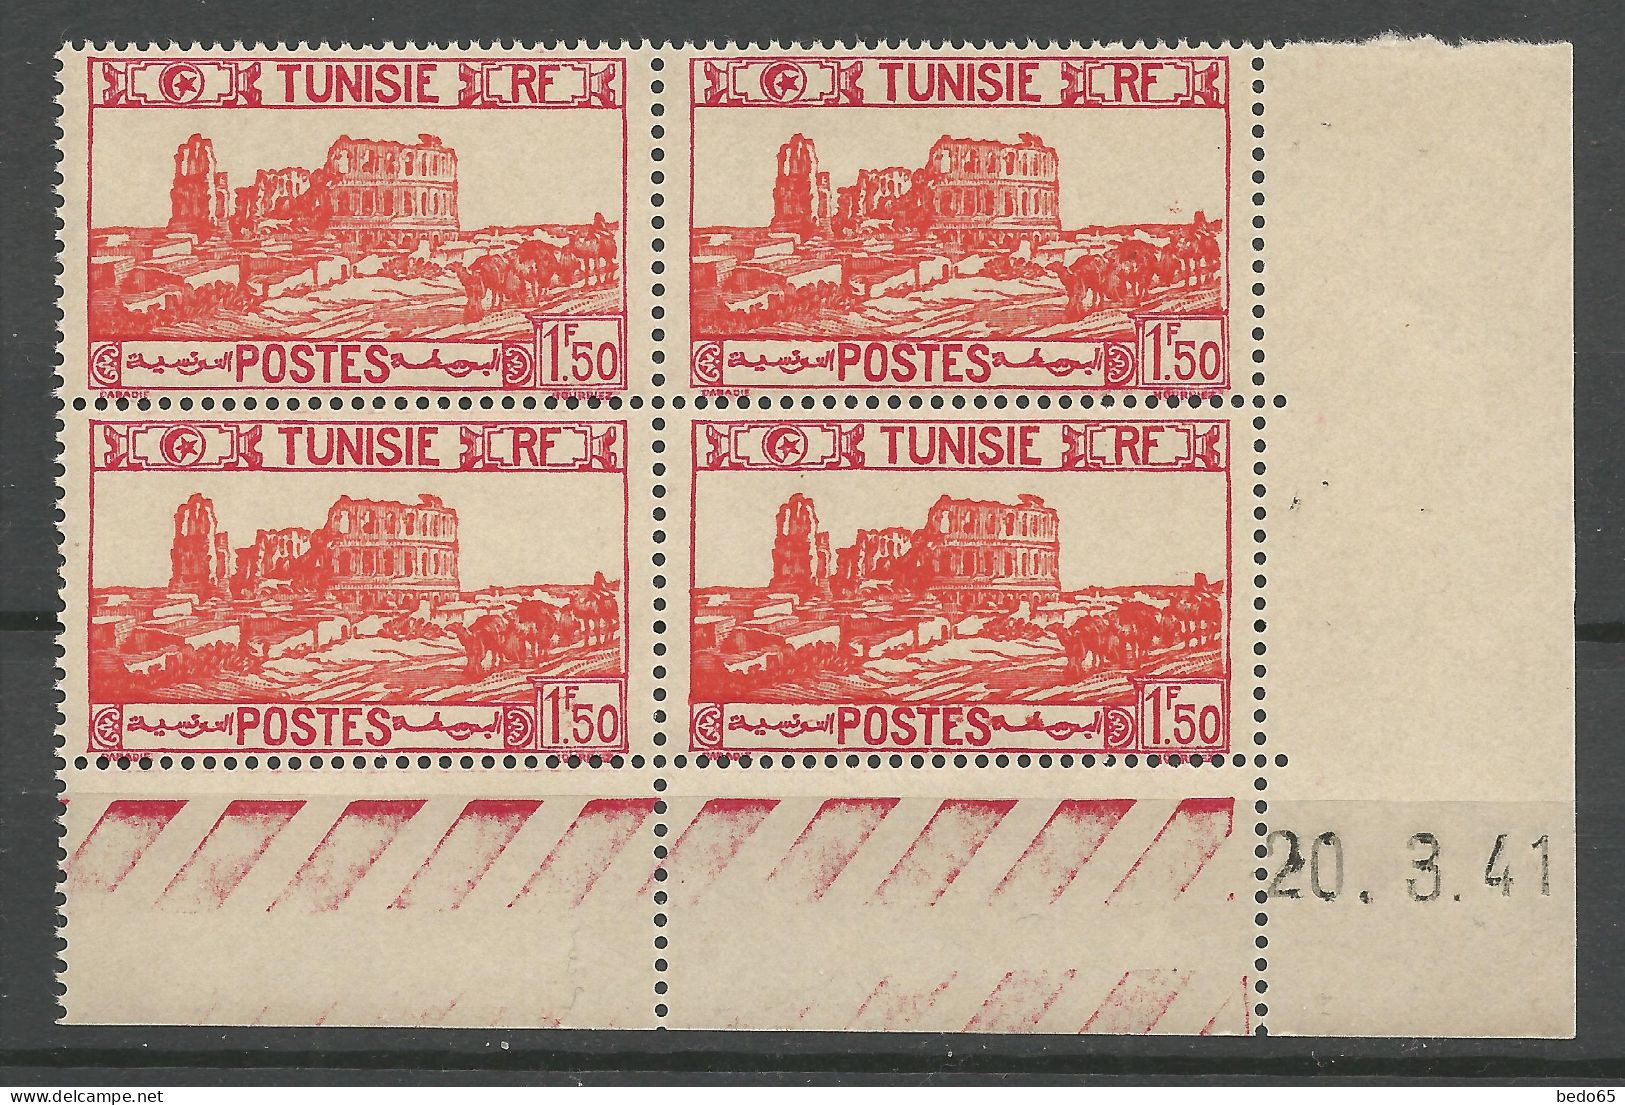 TUNISIE N° 216 Bloc De 4 Coin Daté 20 / 3 / 41 NEUF** LUXE SANS CHARNIERE NI TRACE / Hingeless  / MNH - Unused Stamps